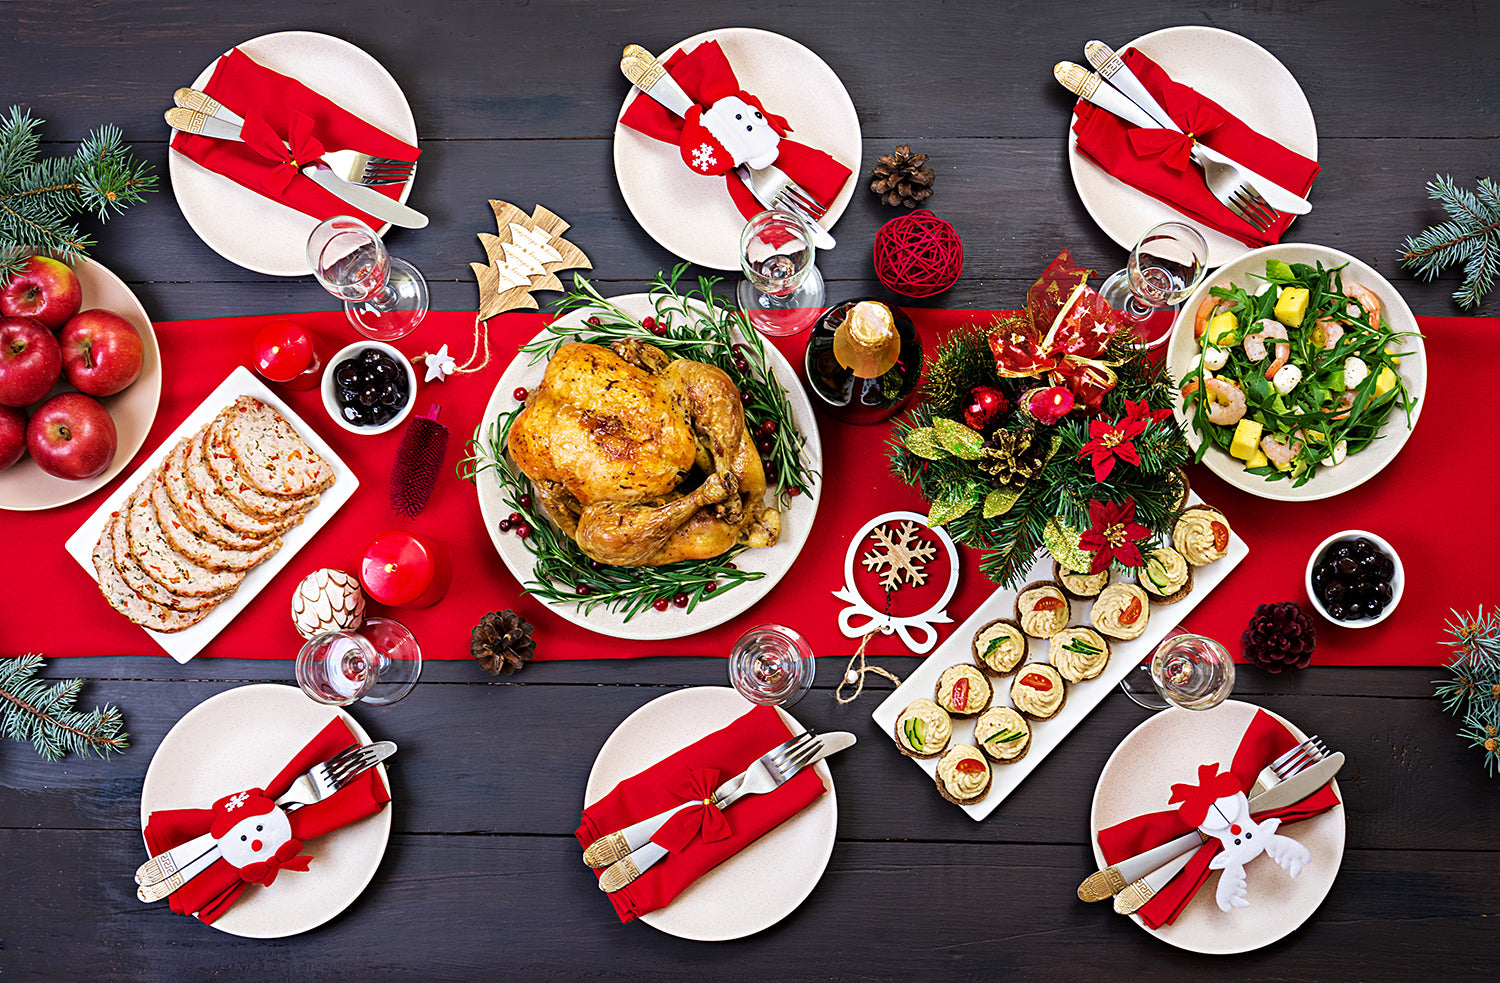 How To Use Flexible Dieting To Maintain Your Goals Over The Christmas Season